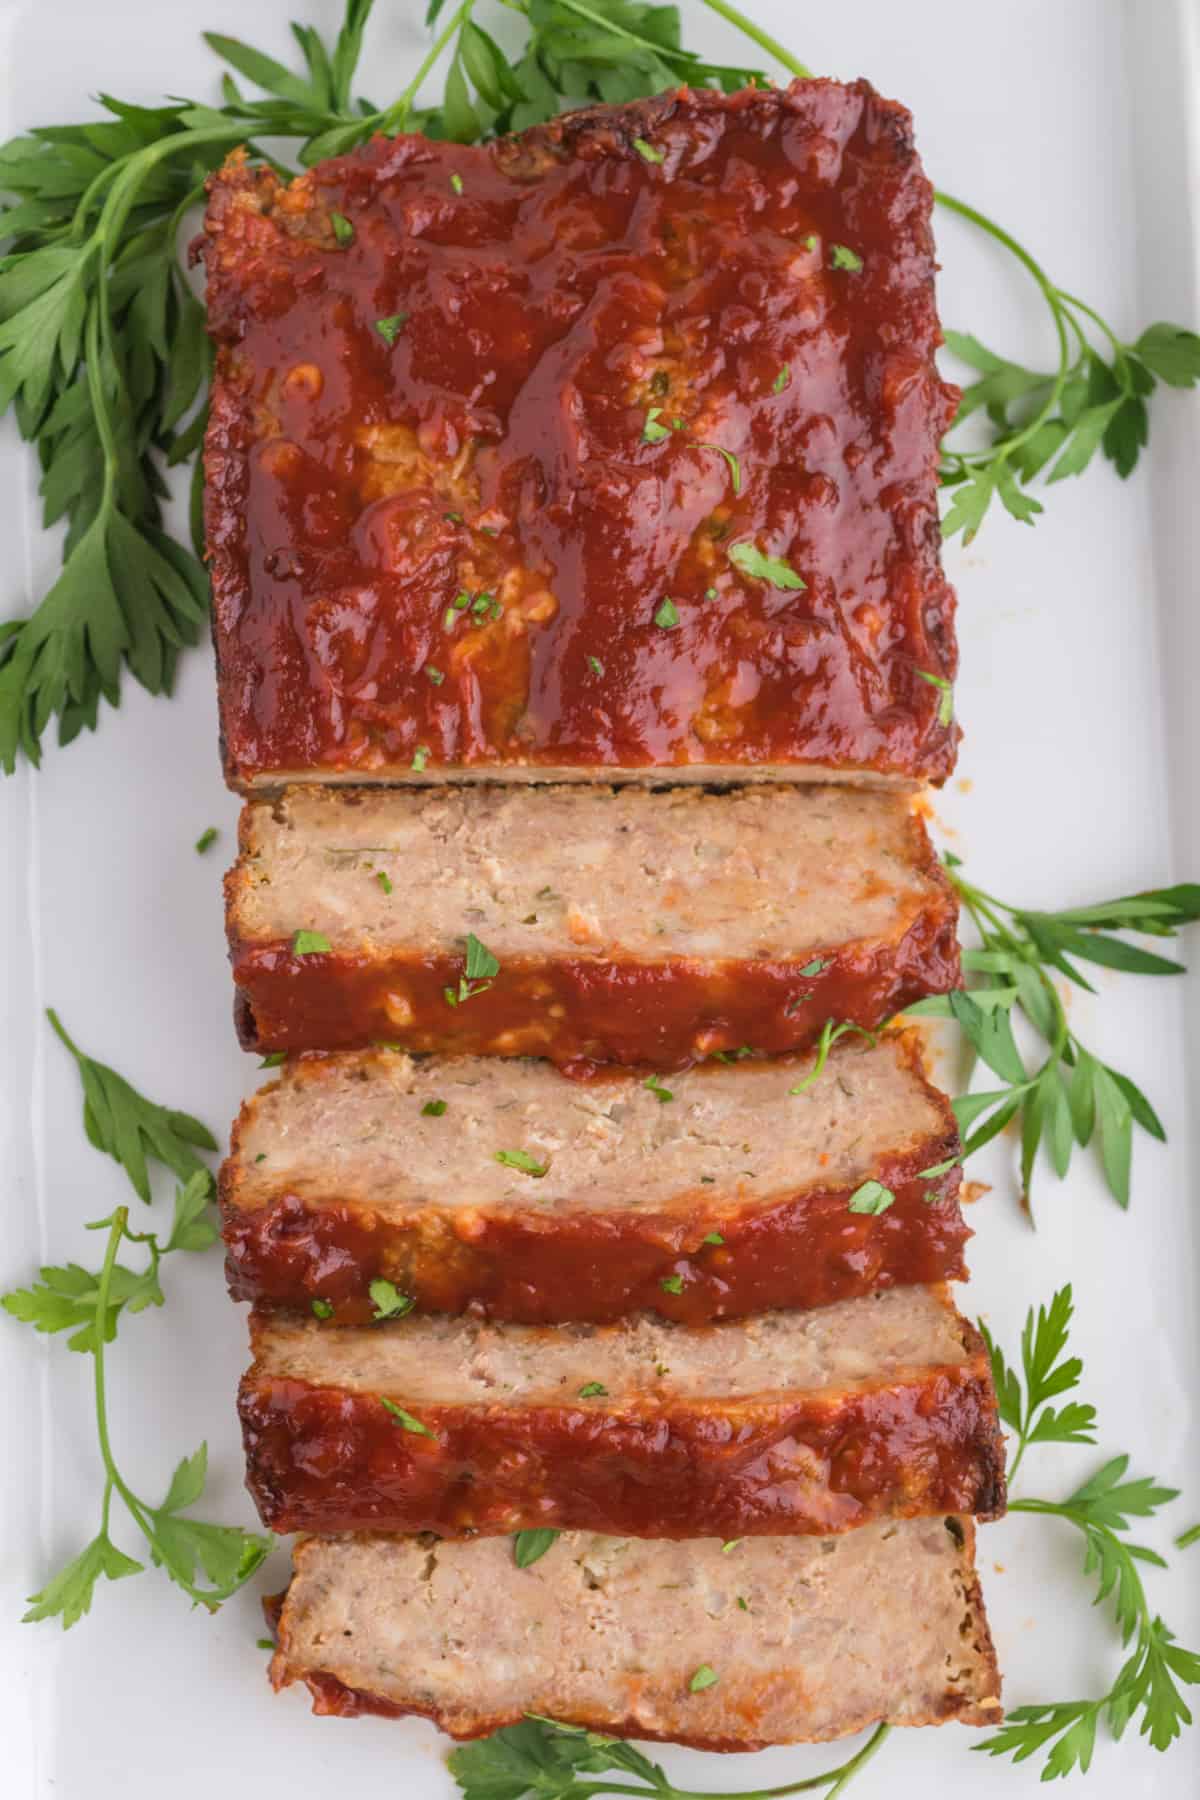 food, with Ground Chicken Meatloaf